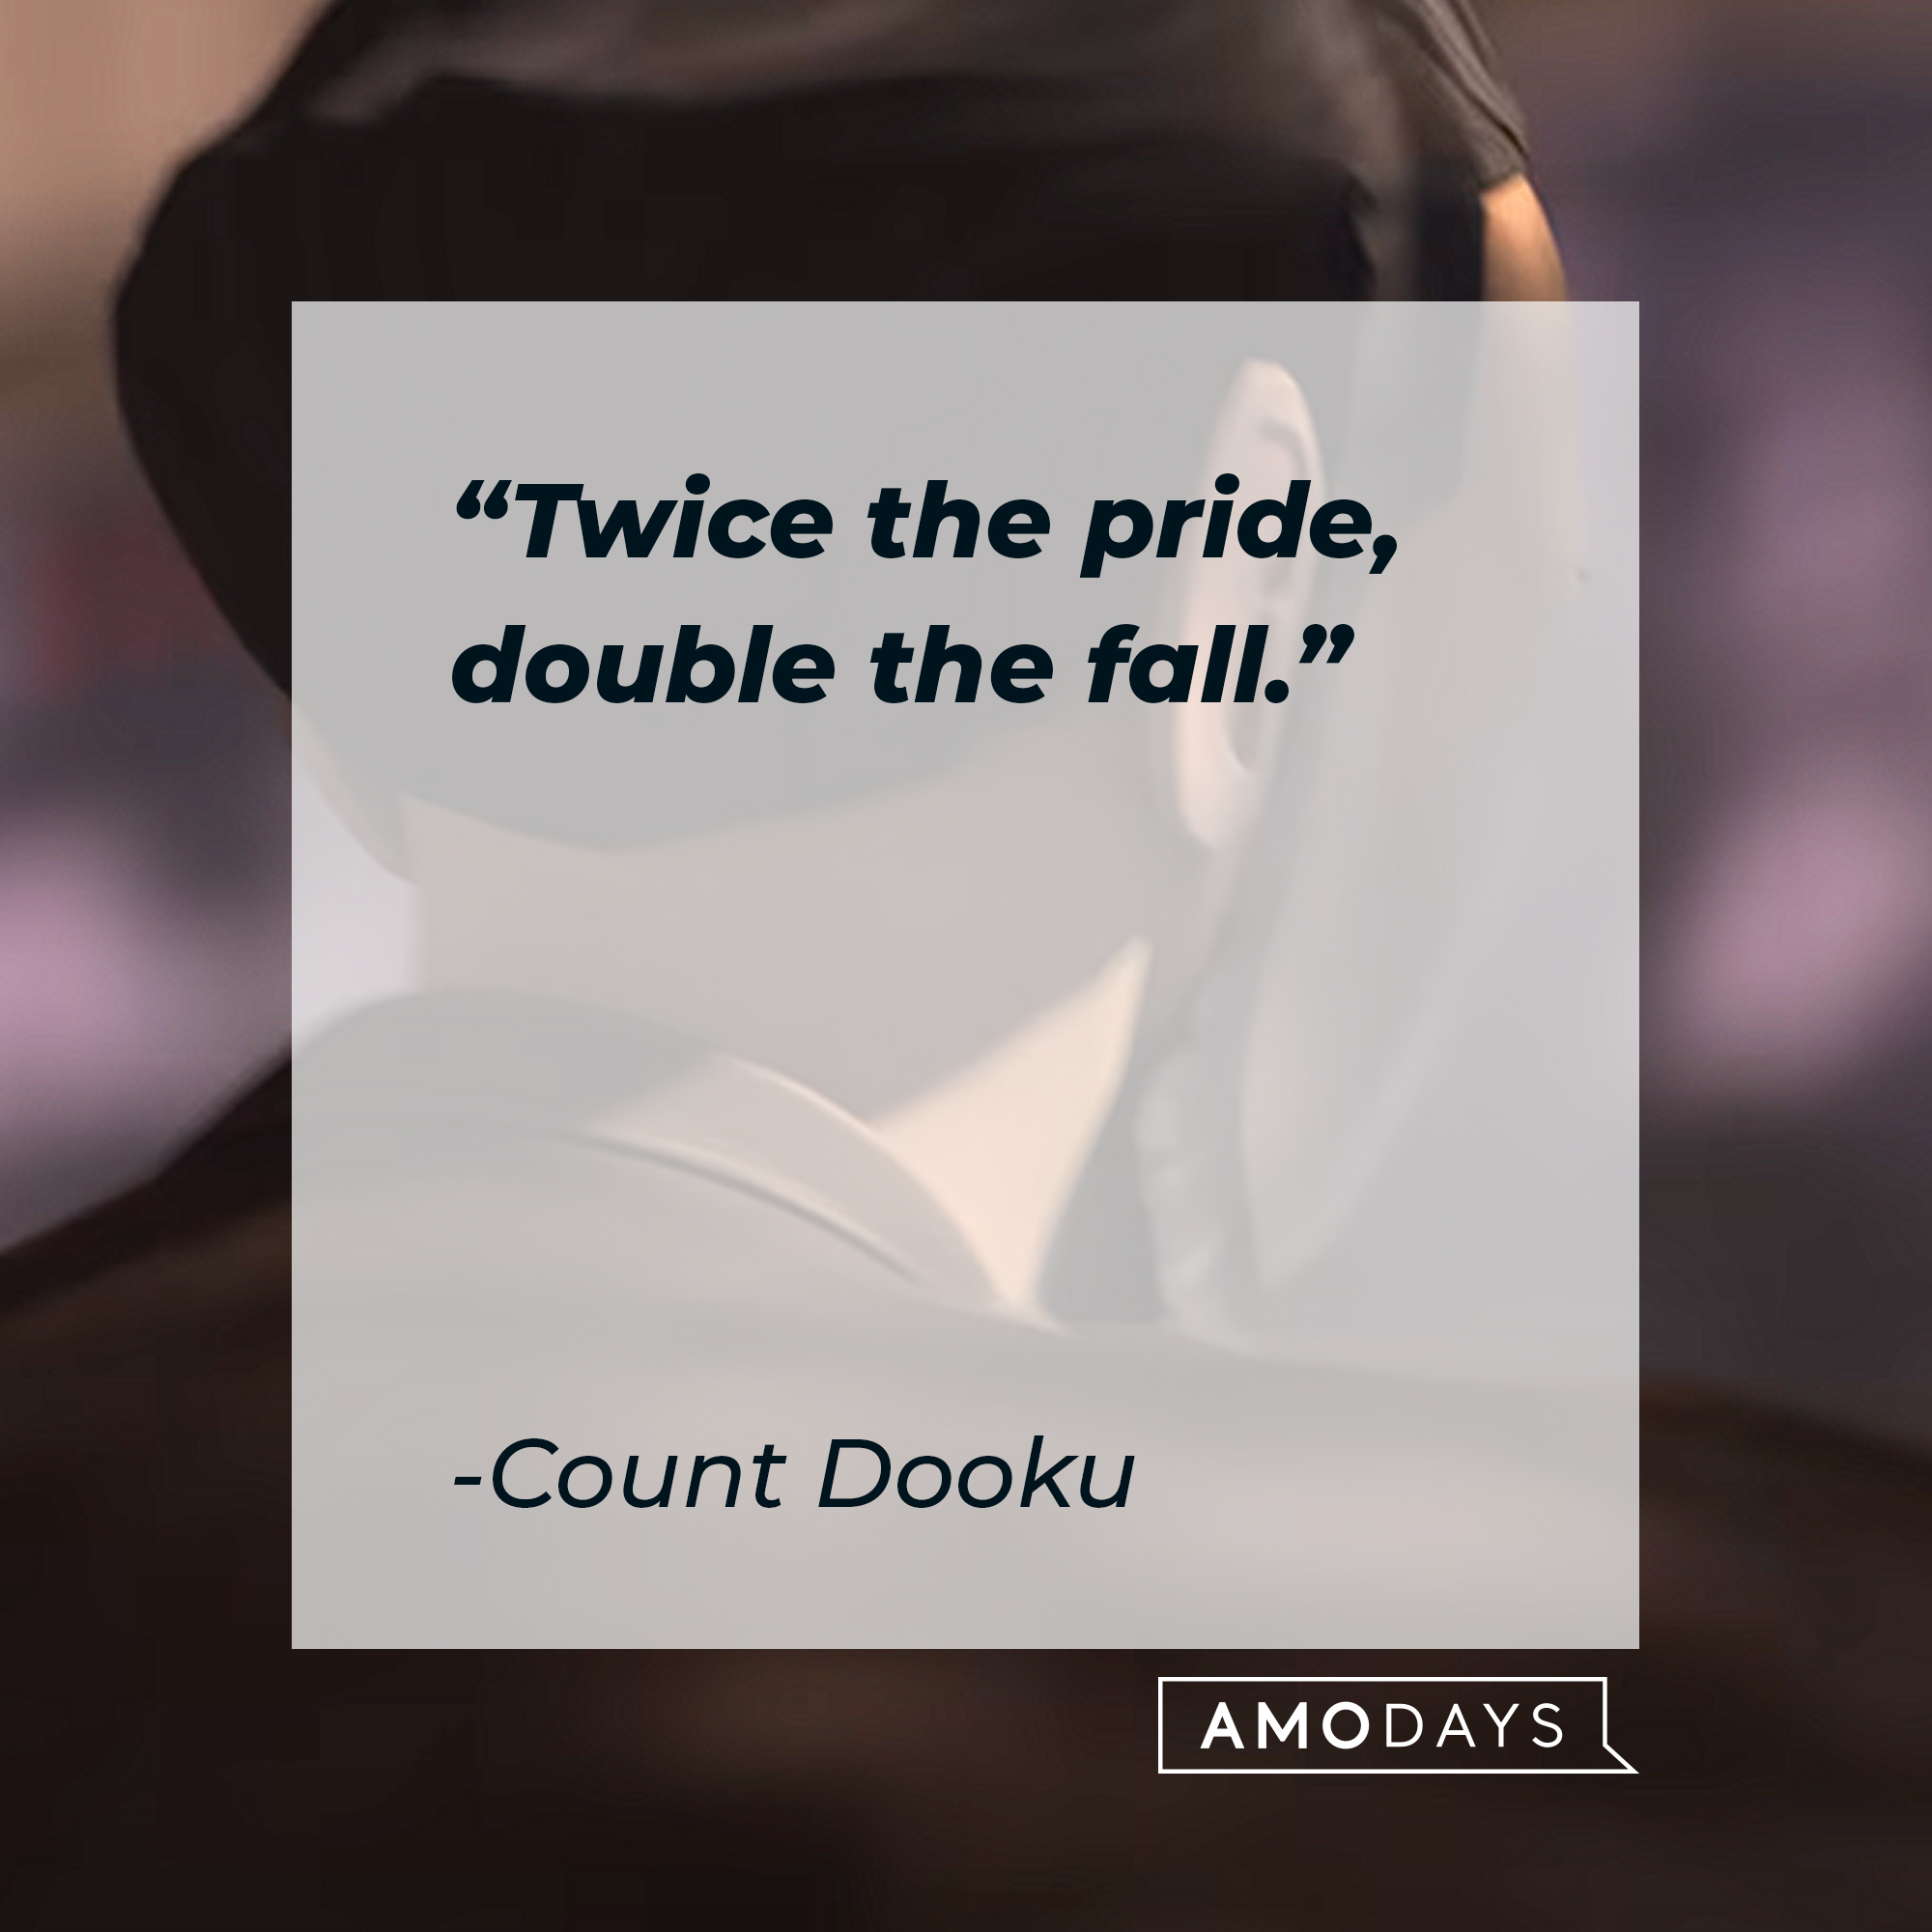 Count Dooku's quote: "Twice the pride, double the fall." | Source: youtube.com/StarWars